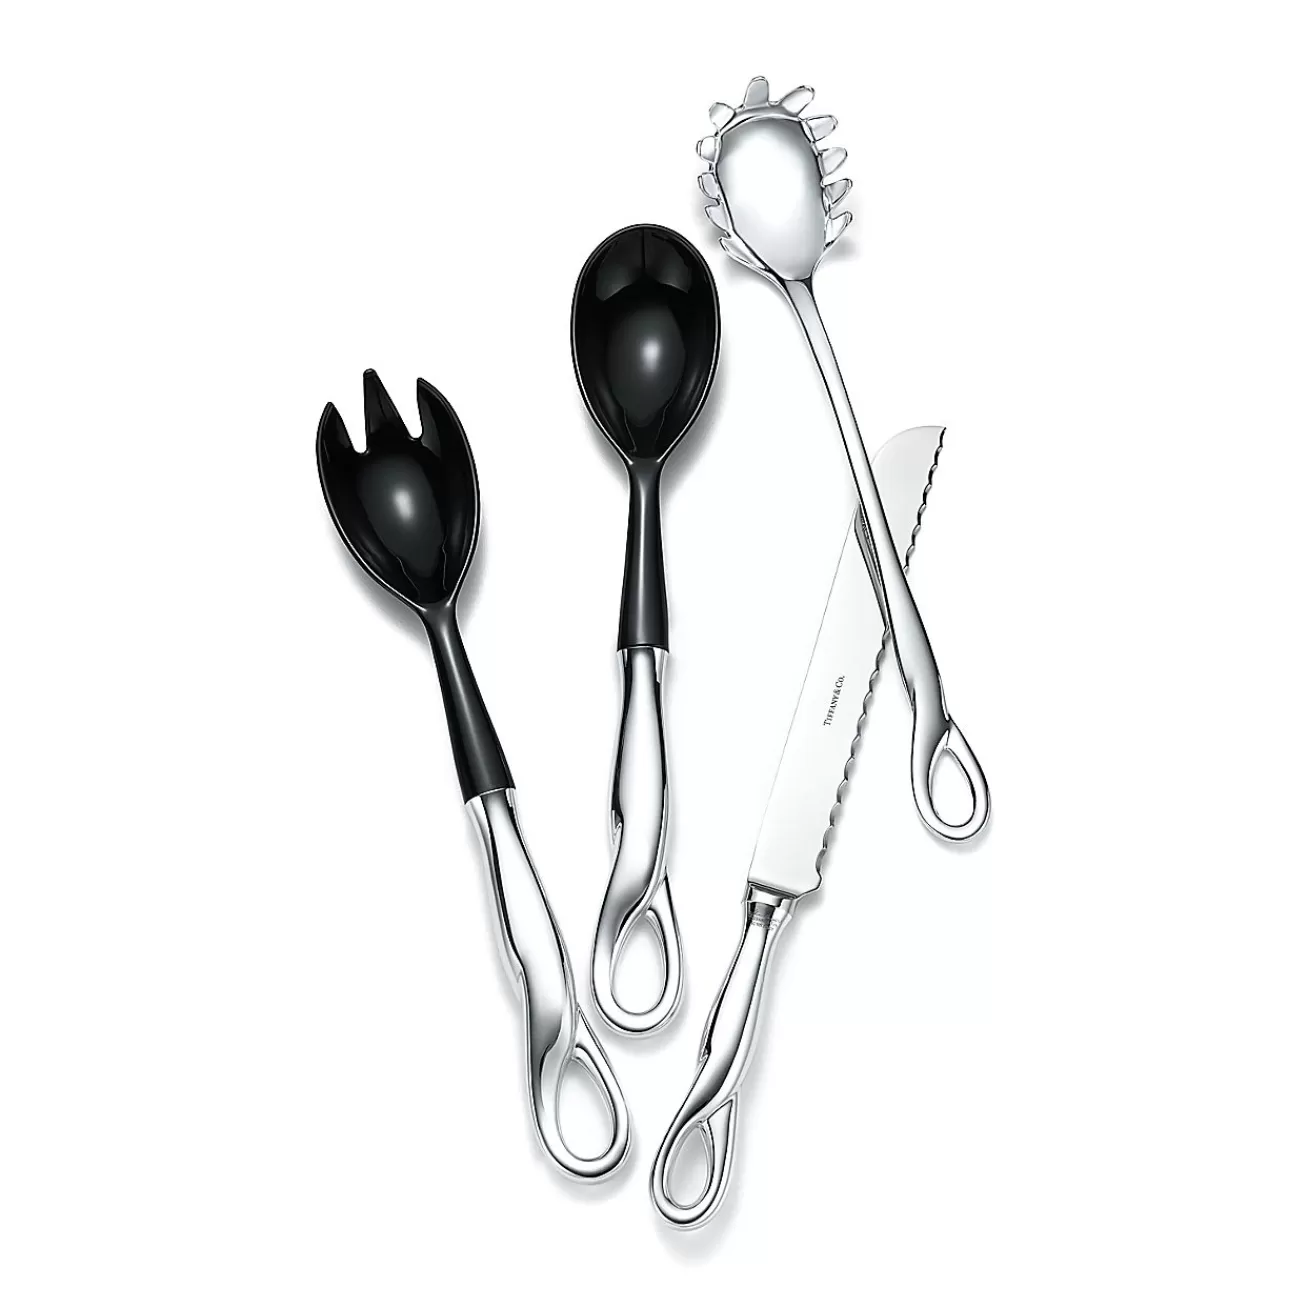 Tiffany & Co. Elsa Peretti® Padova™ salad serving fork in sterling silver and resin. | ^ Tableware | Flatware & Trays